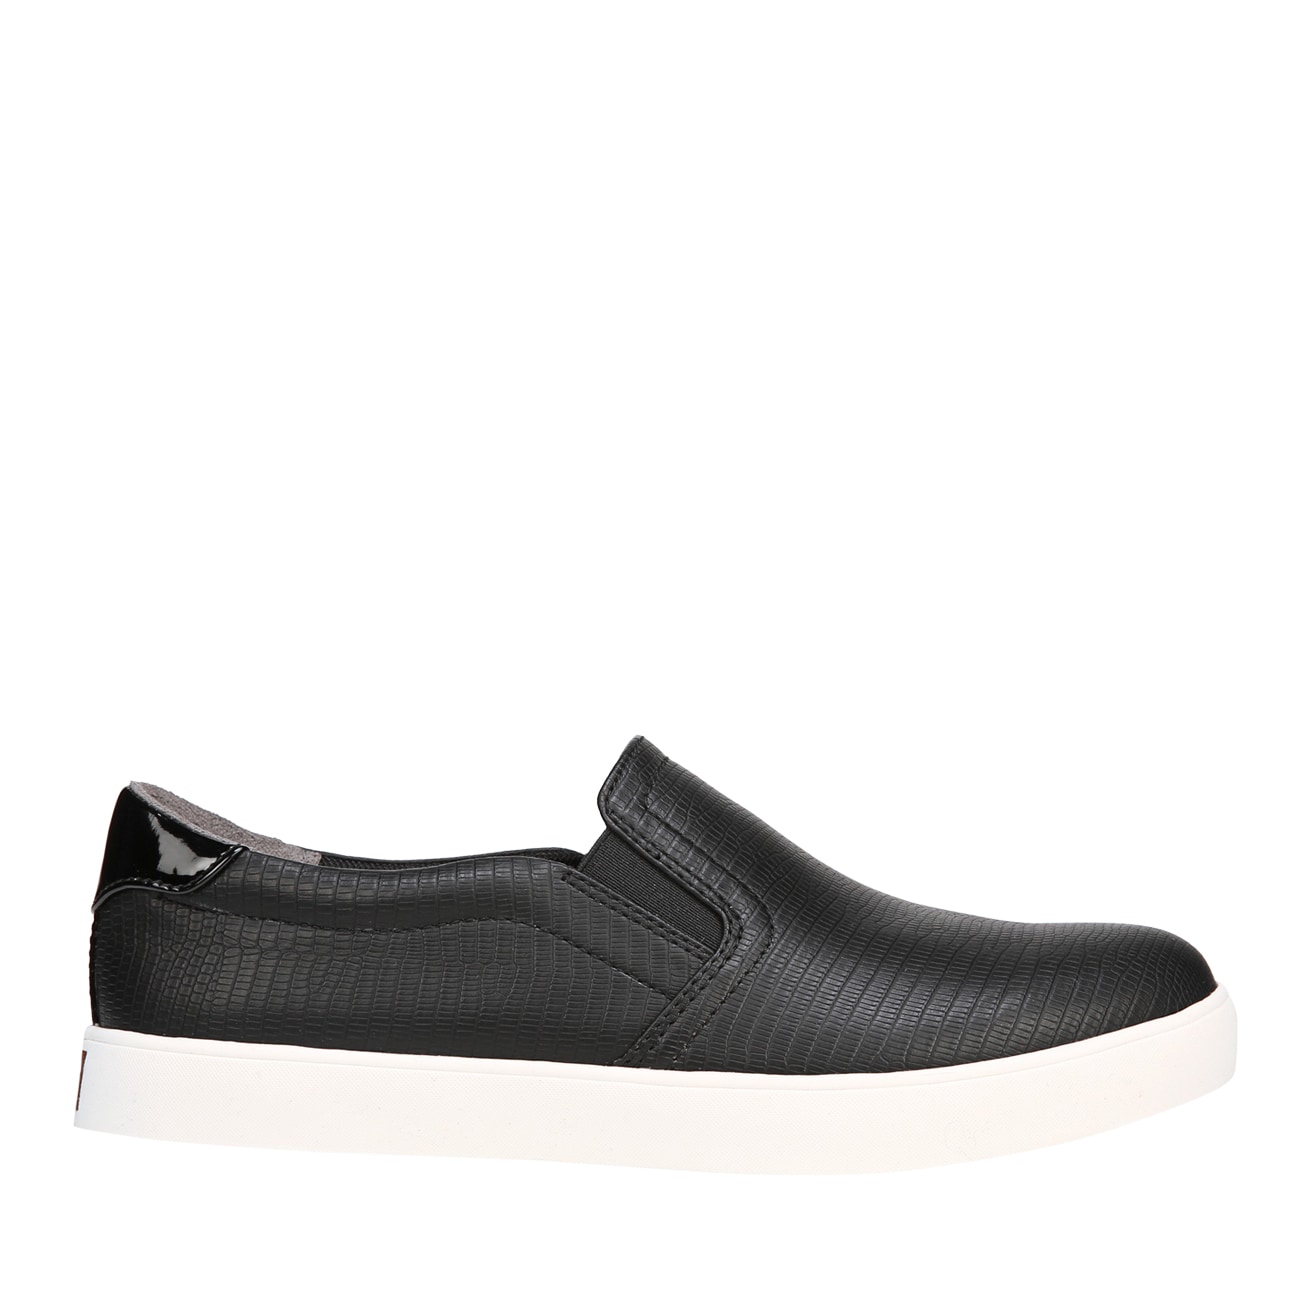 Dr Scholls Madison Sneaker | The Shoe Company